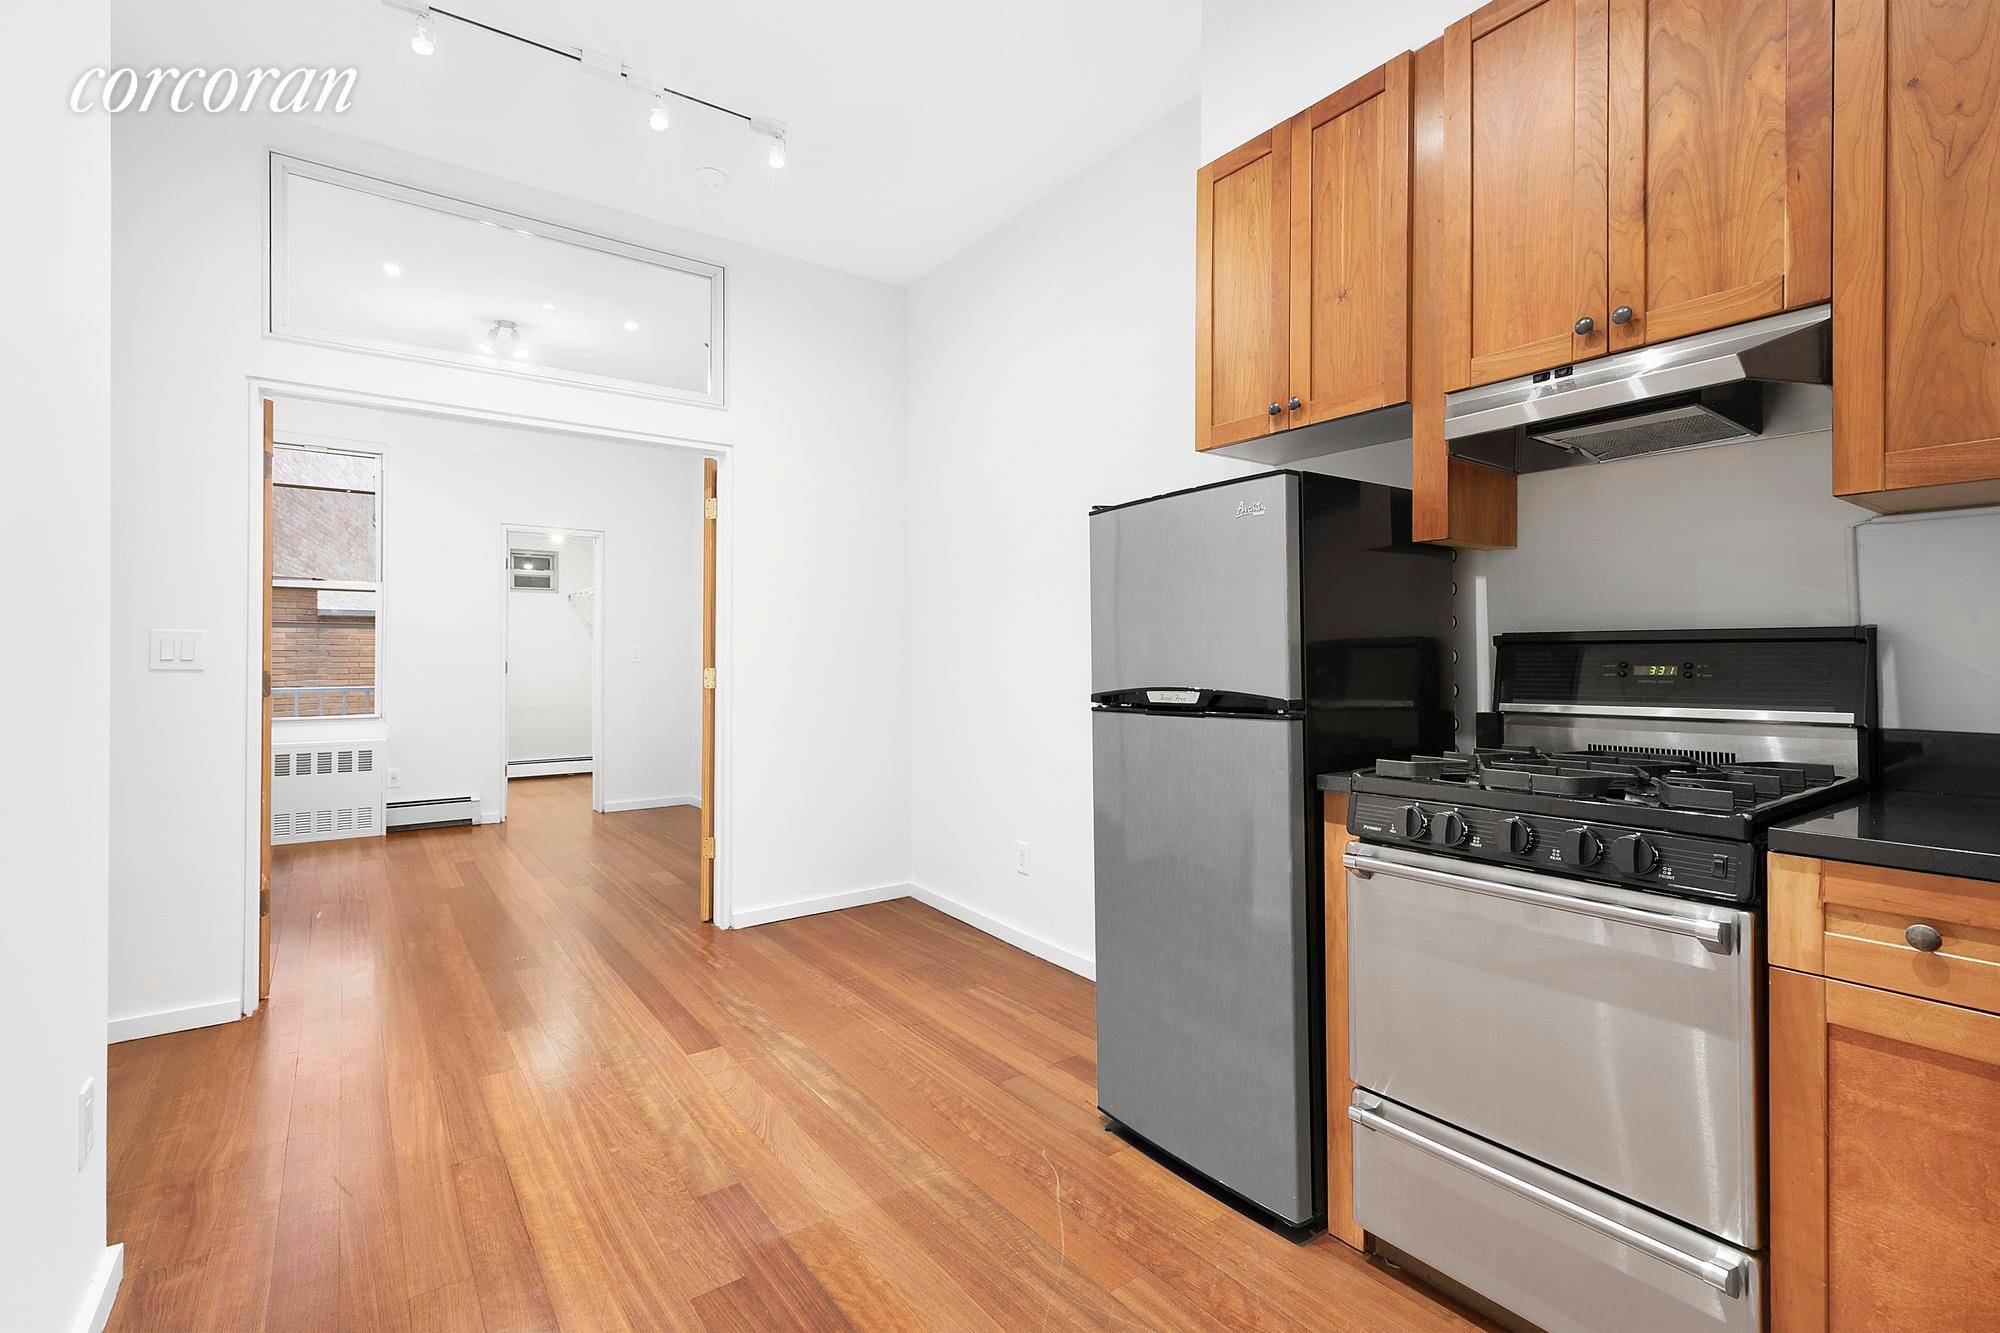 Welcome to this sun drenched 2 bedroom apartment conveniently located in Williamsburg.